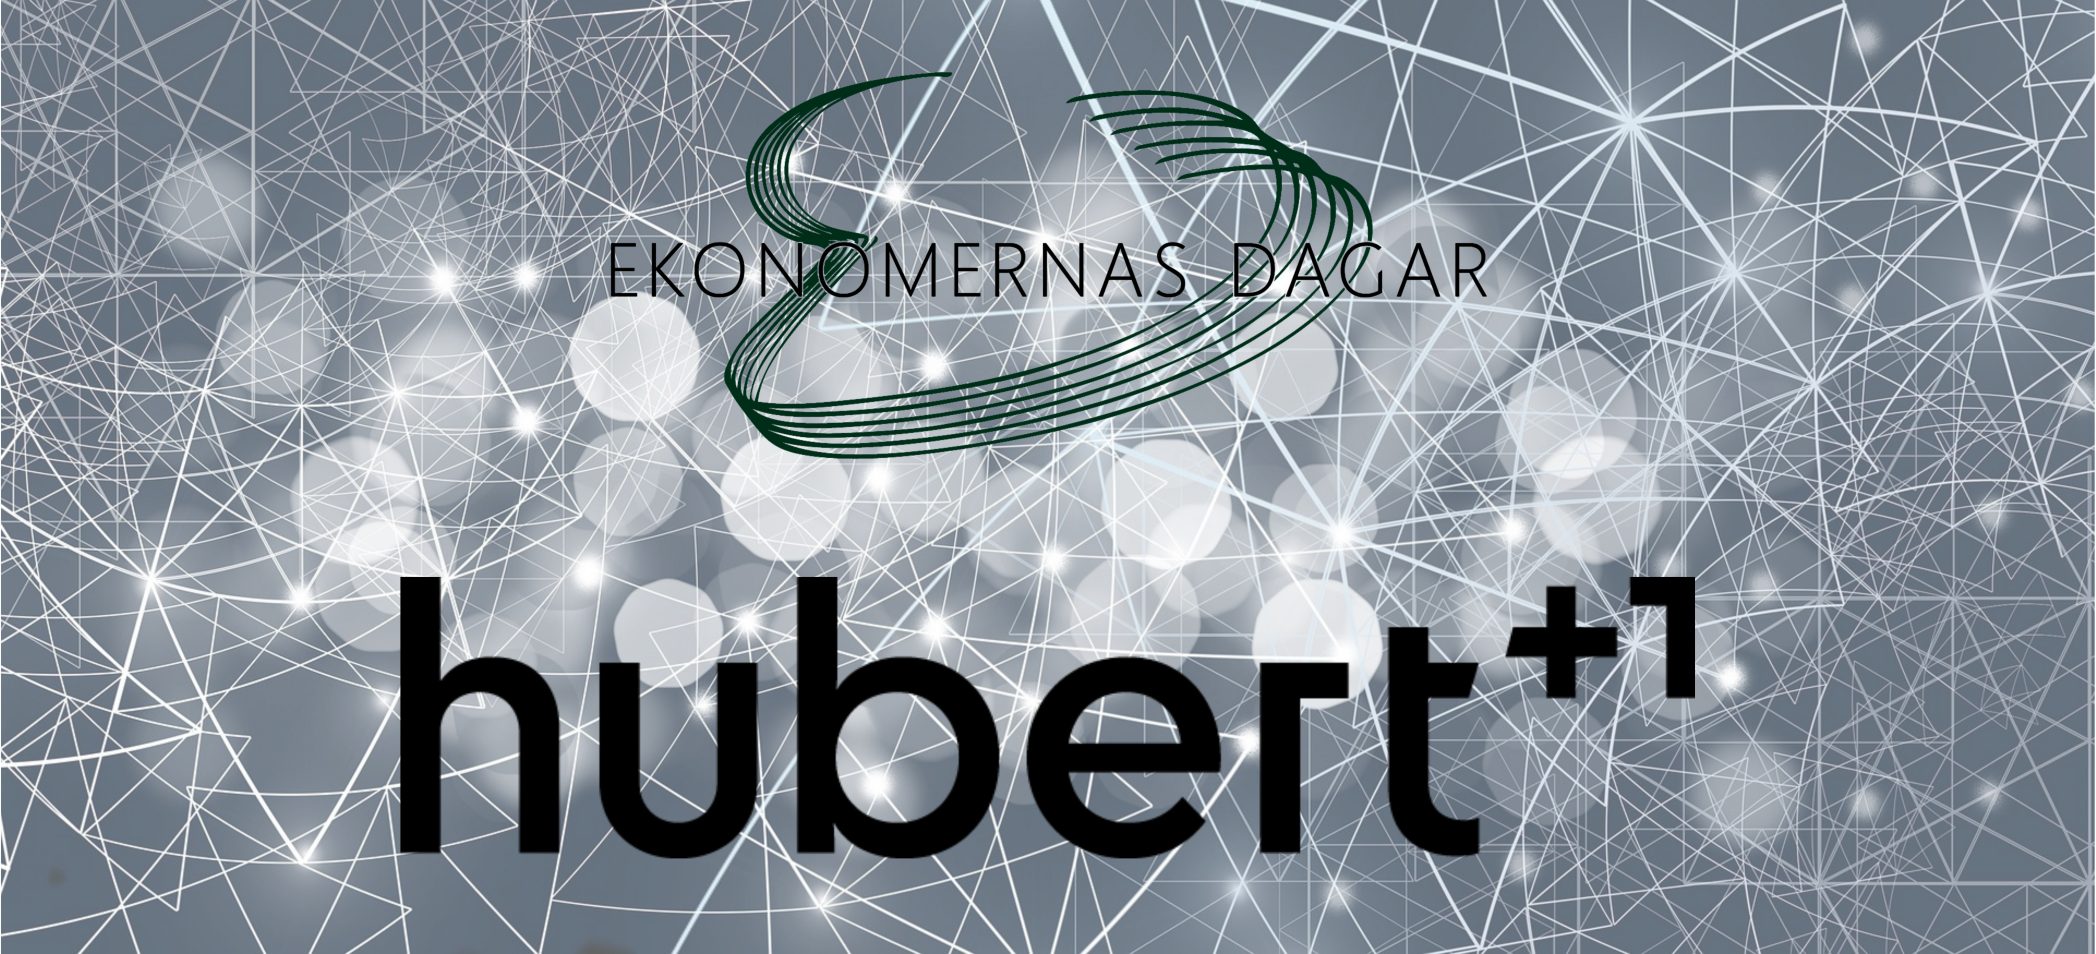 Read more about the article Ekonomernas Dagar teams up with Hubert to provide students and companies with interviews powered by Artificial Intelligence